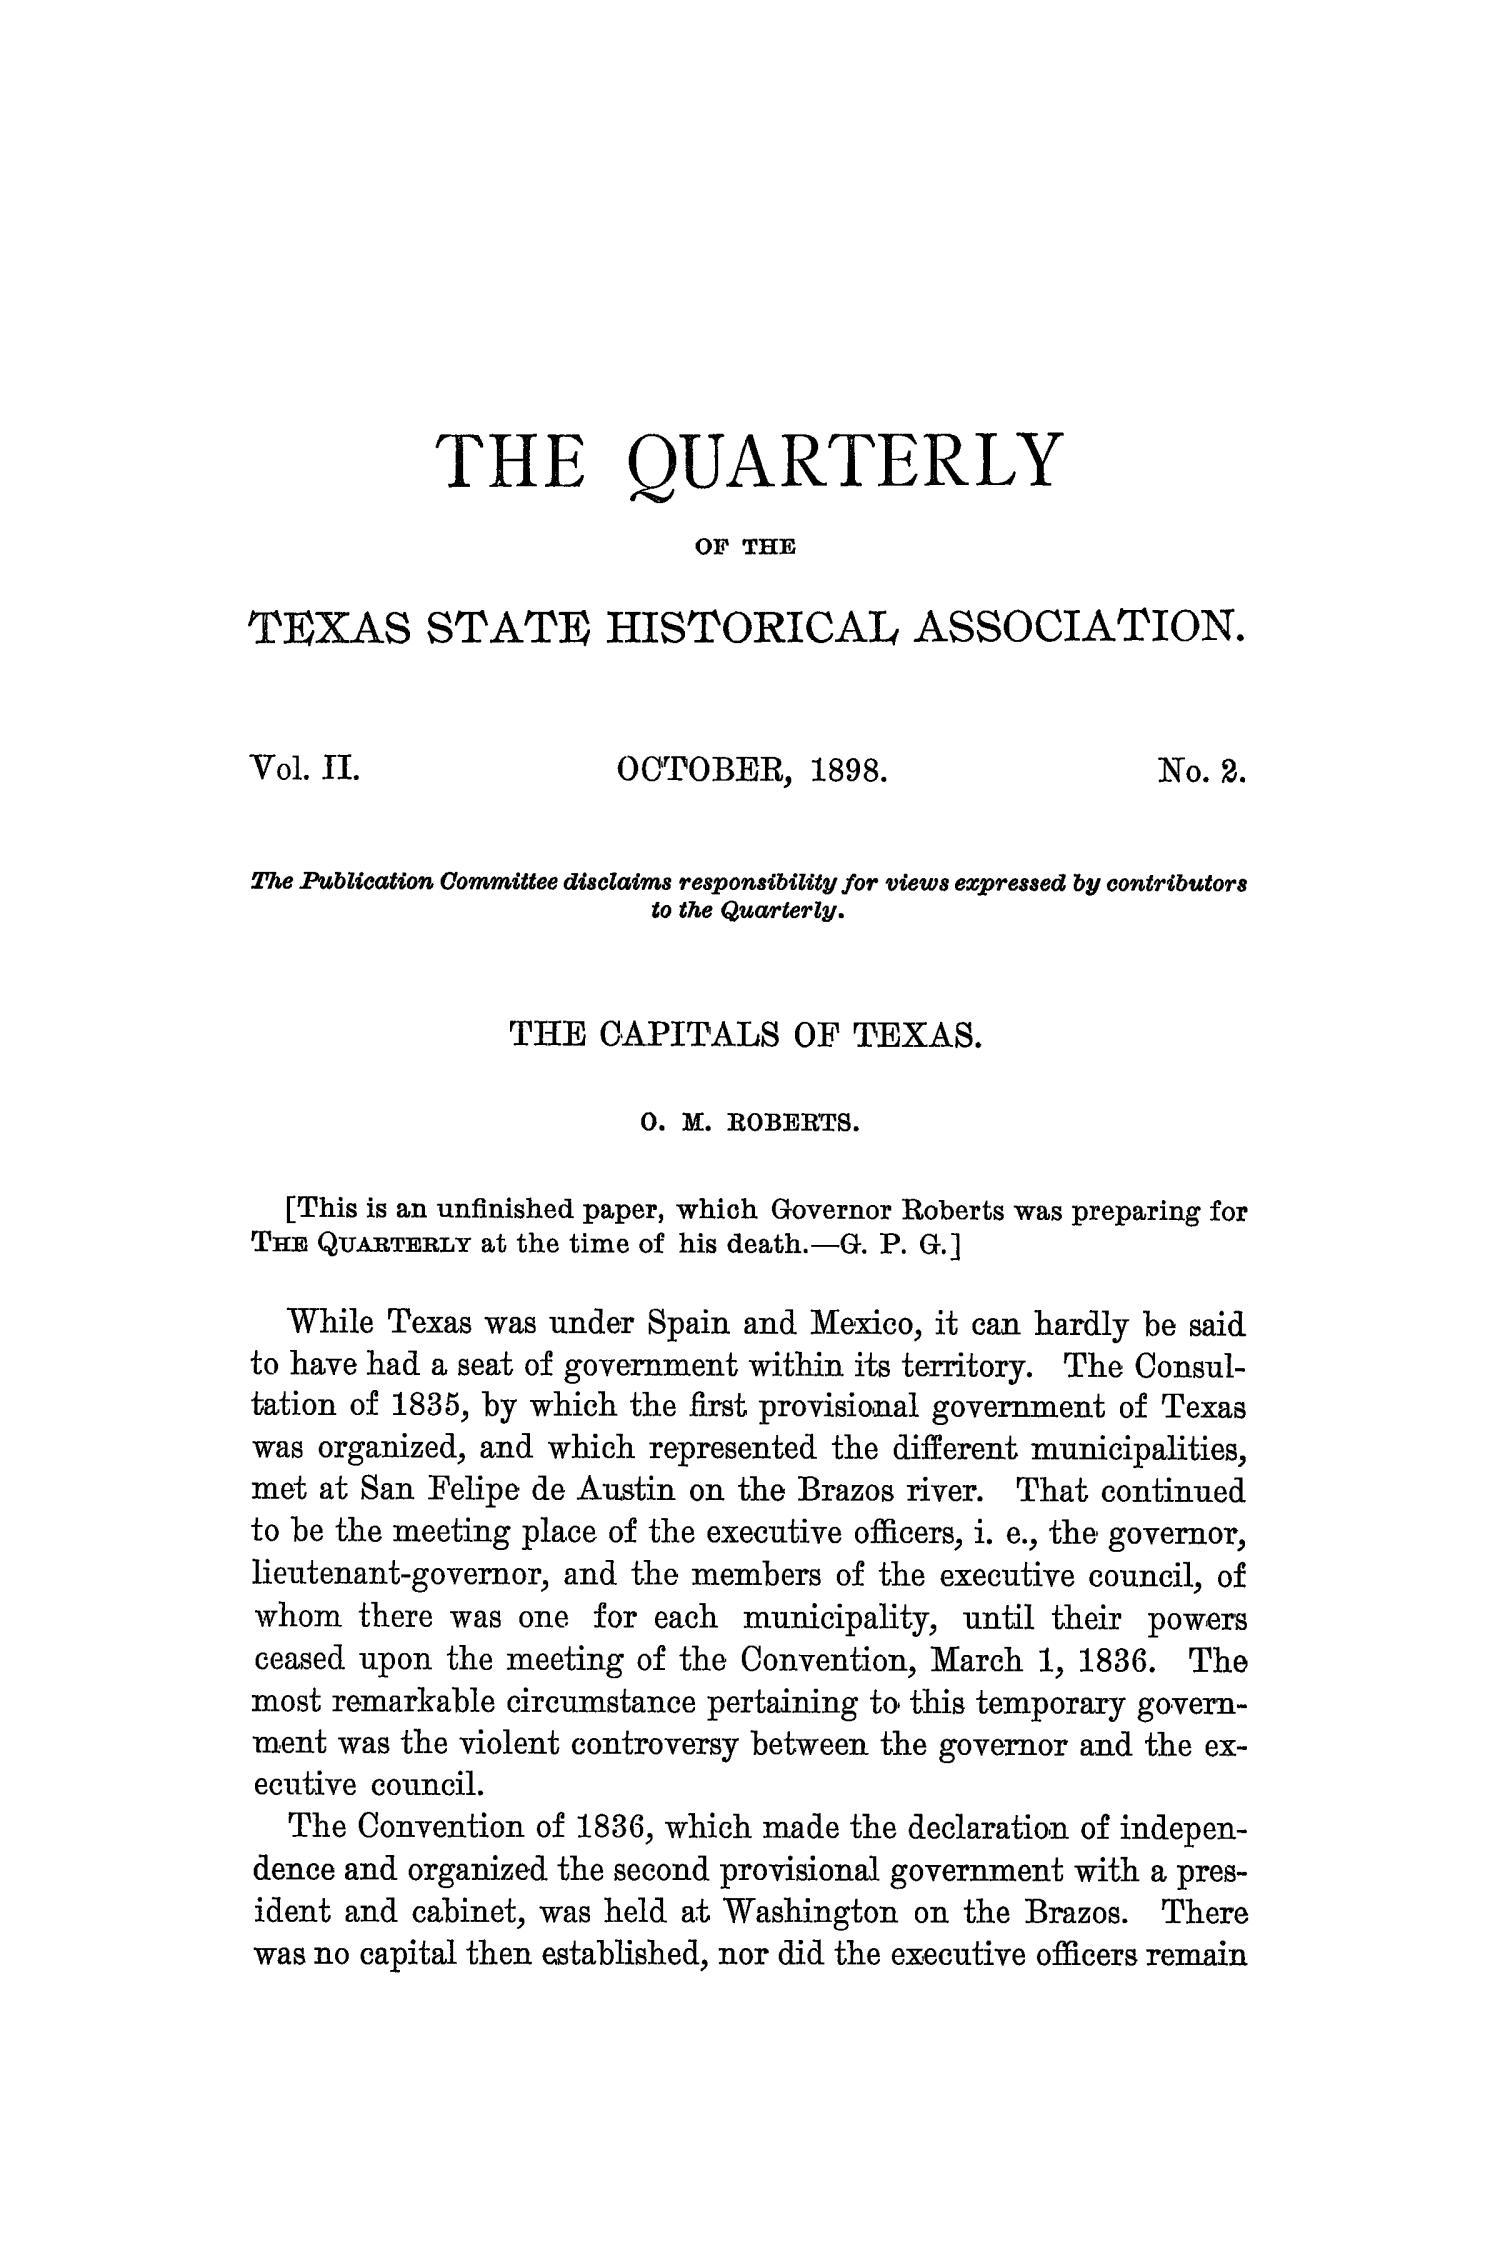 The Quarterly of the Texas State Historical Association, Volume 2, July 1898 - April, 1899
                                                
                                                    117
                                                